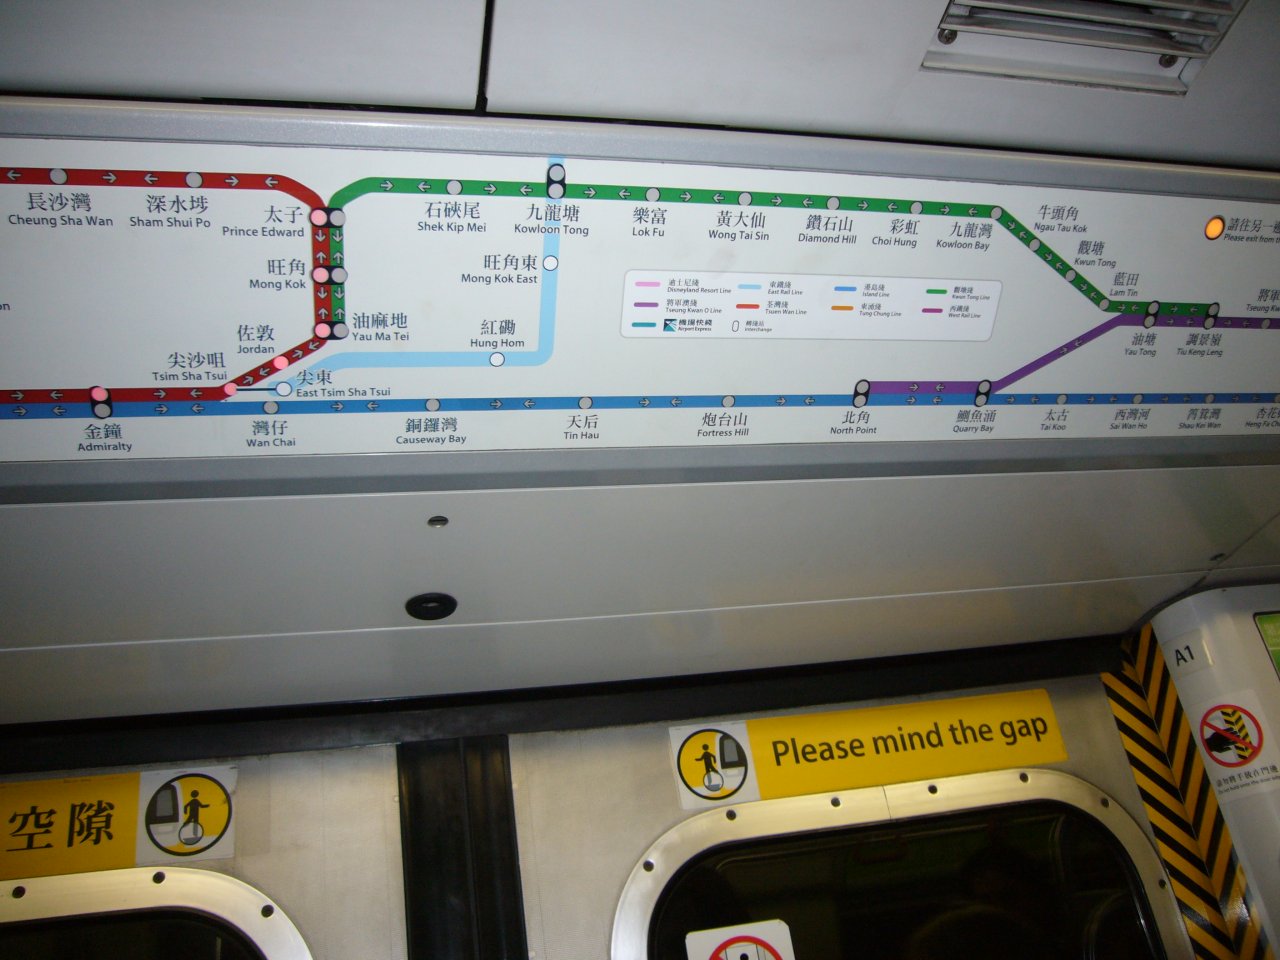 JPEG image - Riding on the MTR from Sham Shui Po back to Tsim Sha Tsui: so clean and so easy to use. ...